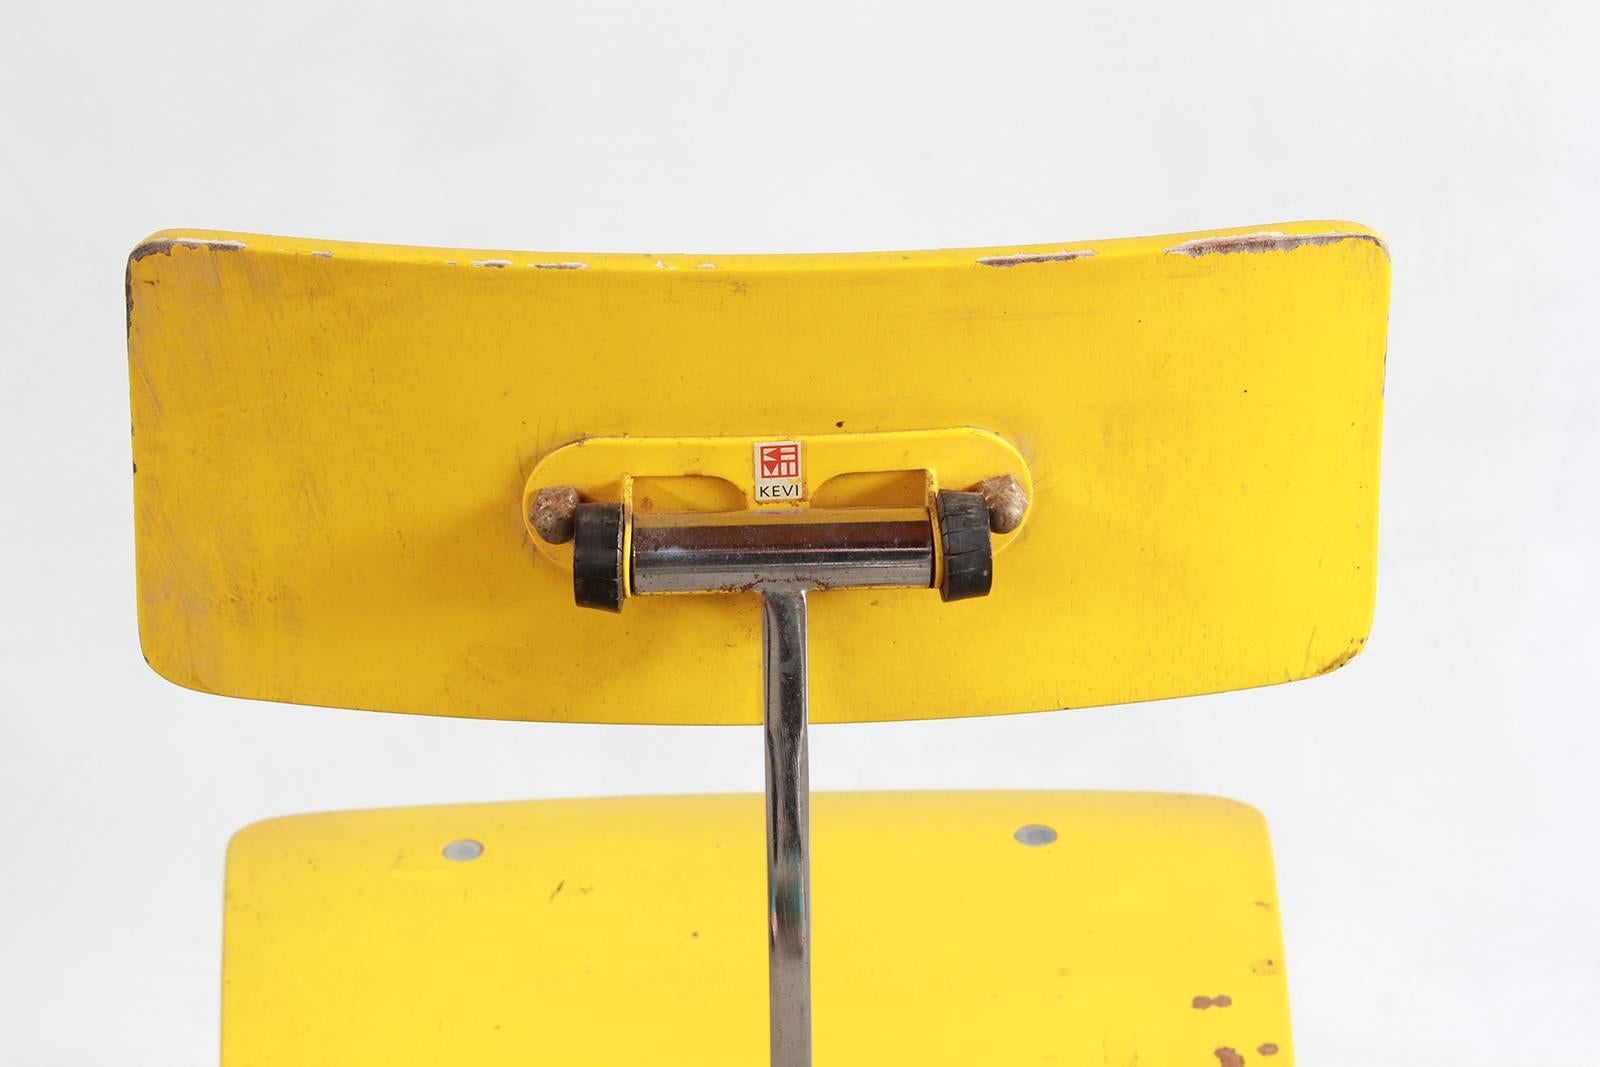 Painted yellow Kevi style desk chair with single pedestal and wheels.